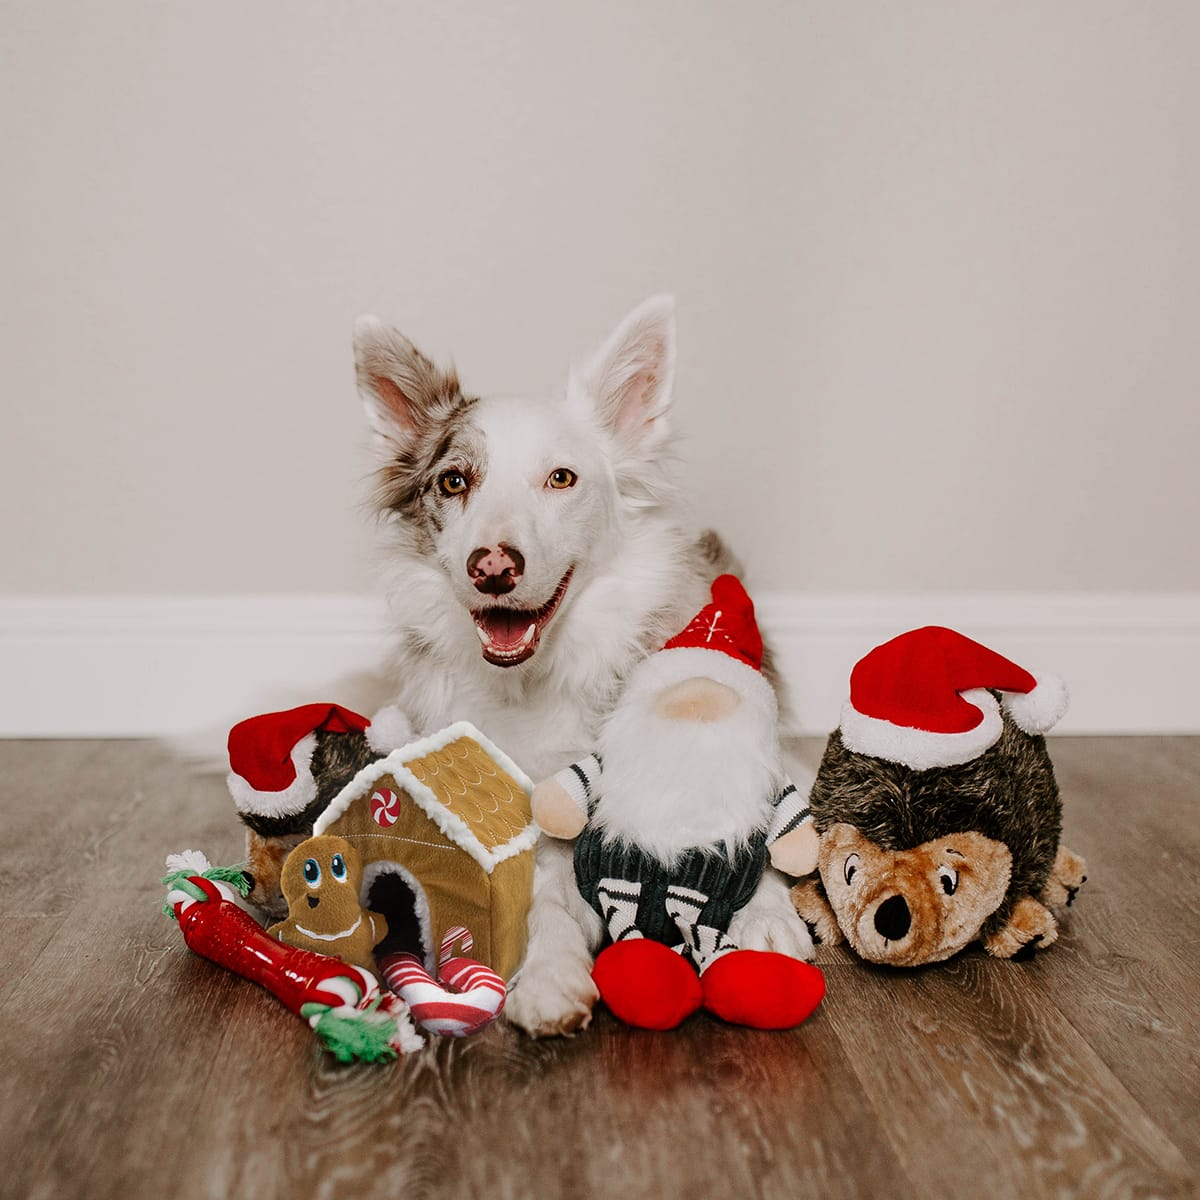 2021 Holiday Gift Guide: Gifts for New Dog Owners